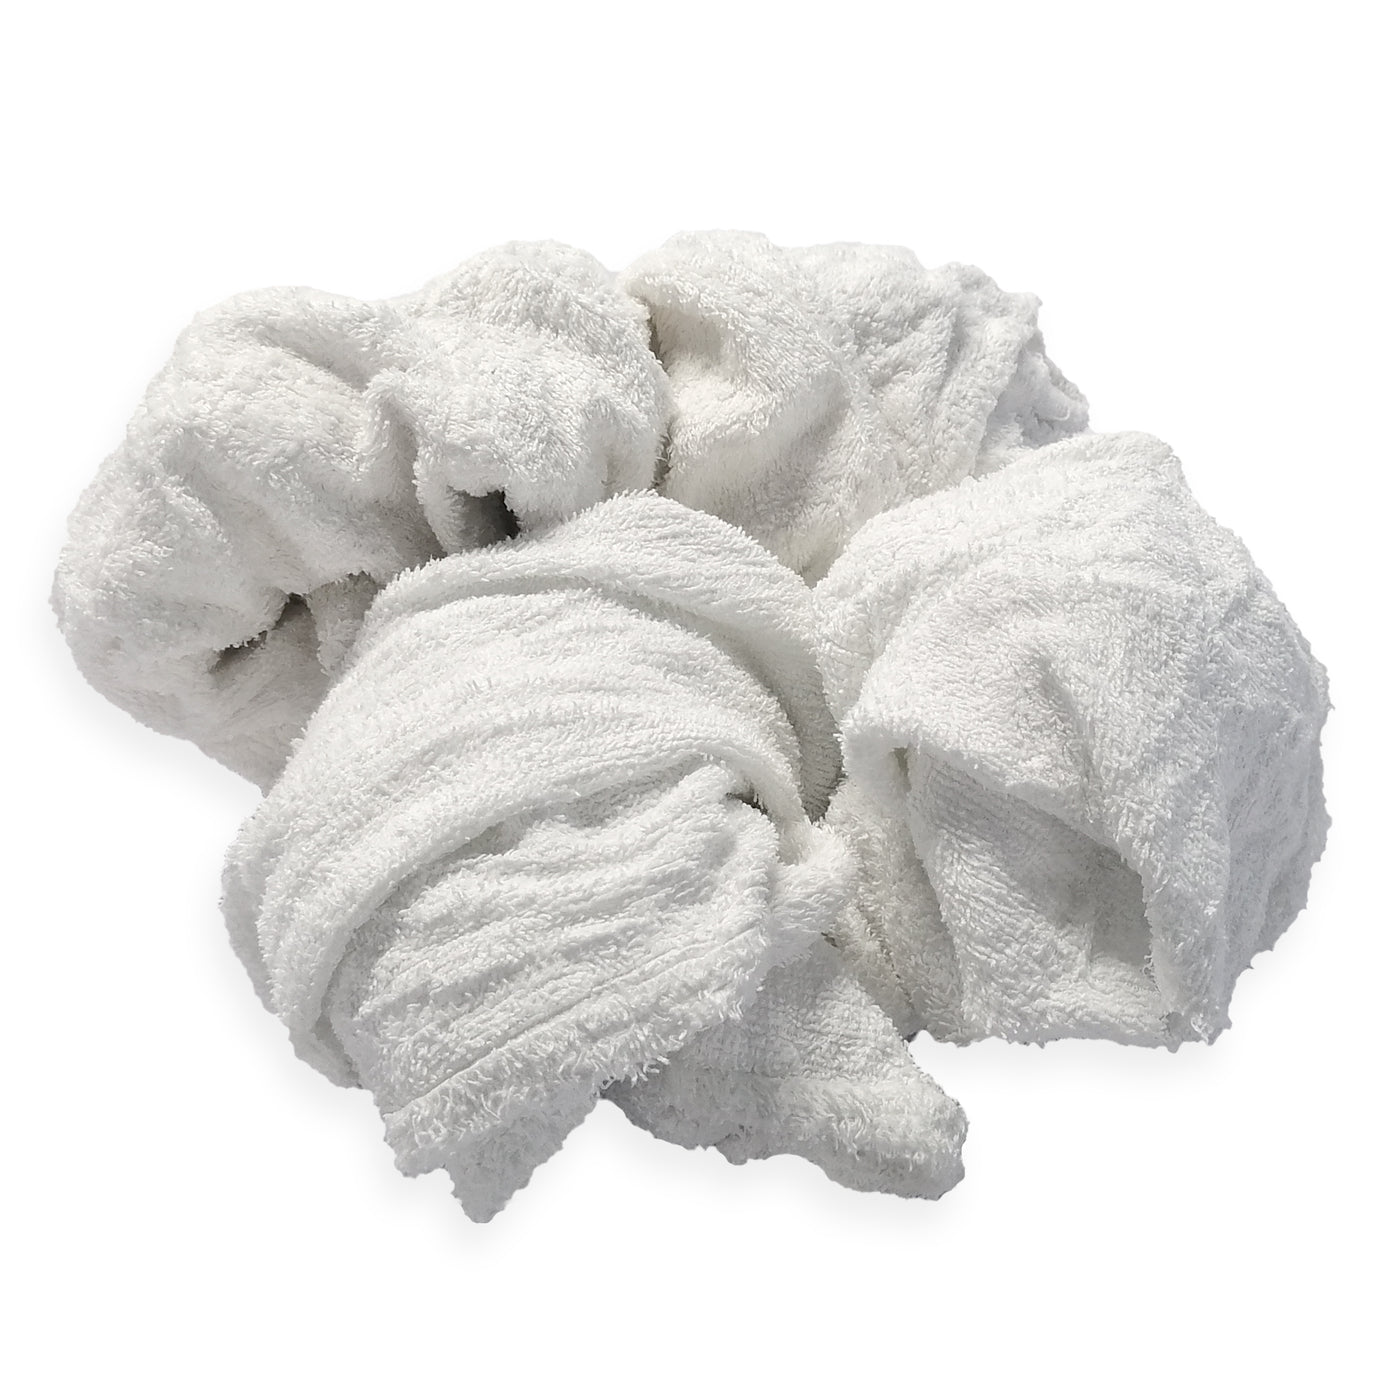 Multipurpose Reusable Cotton Wiping Cloths in White (5 lbs./Box)